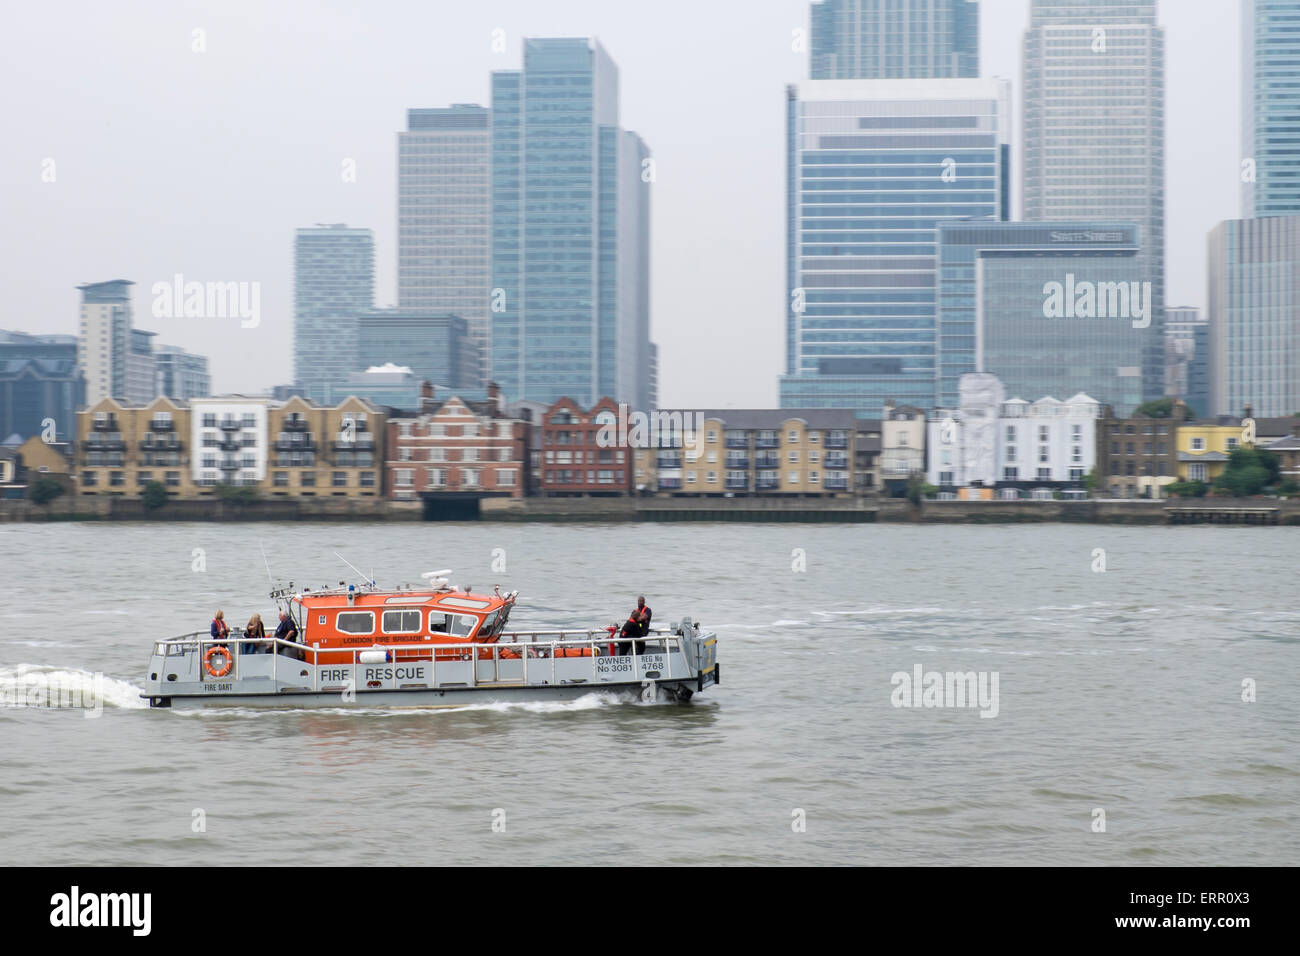 Fire rescue boat on the River Thames opposite Canary Wharf Stock Photo